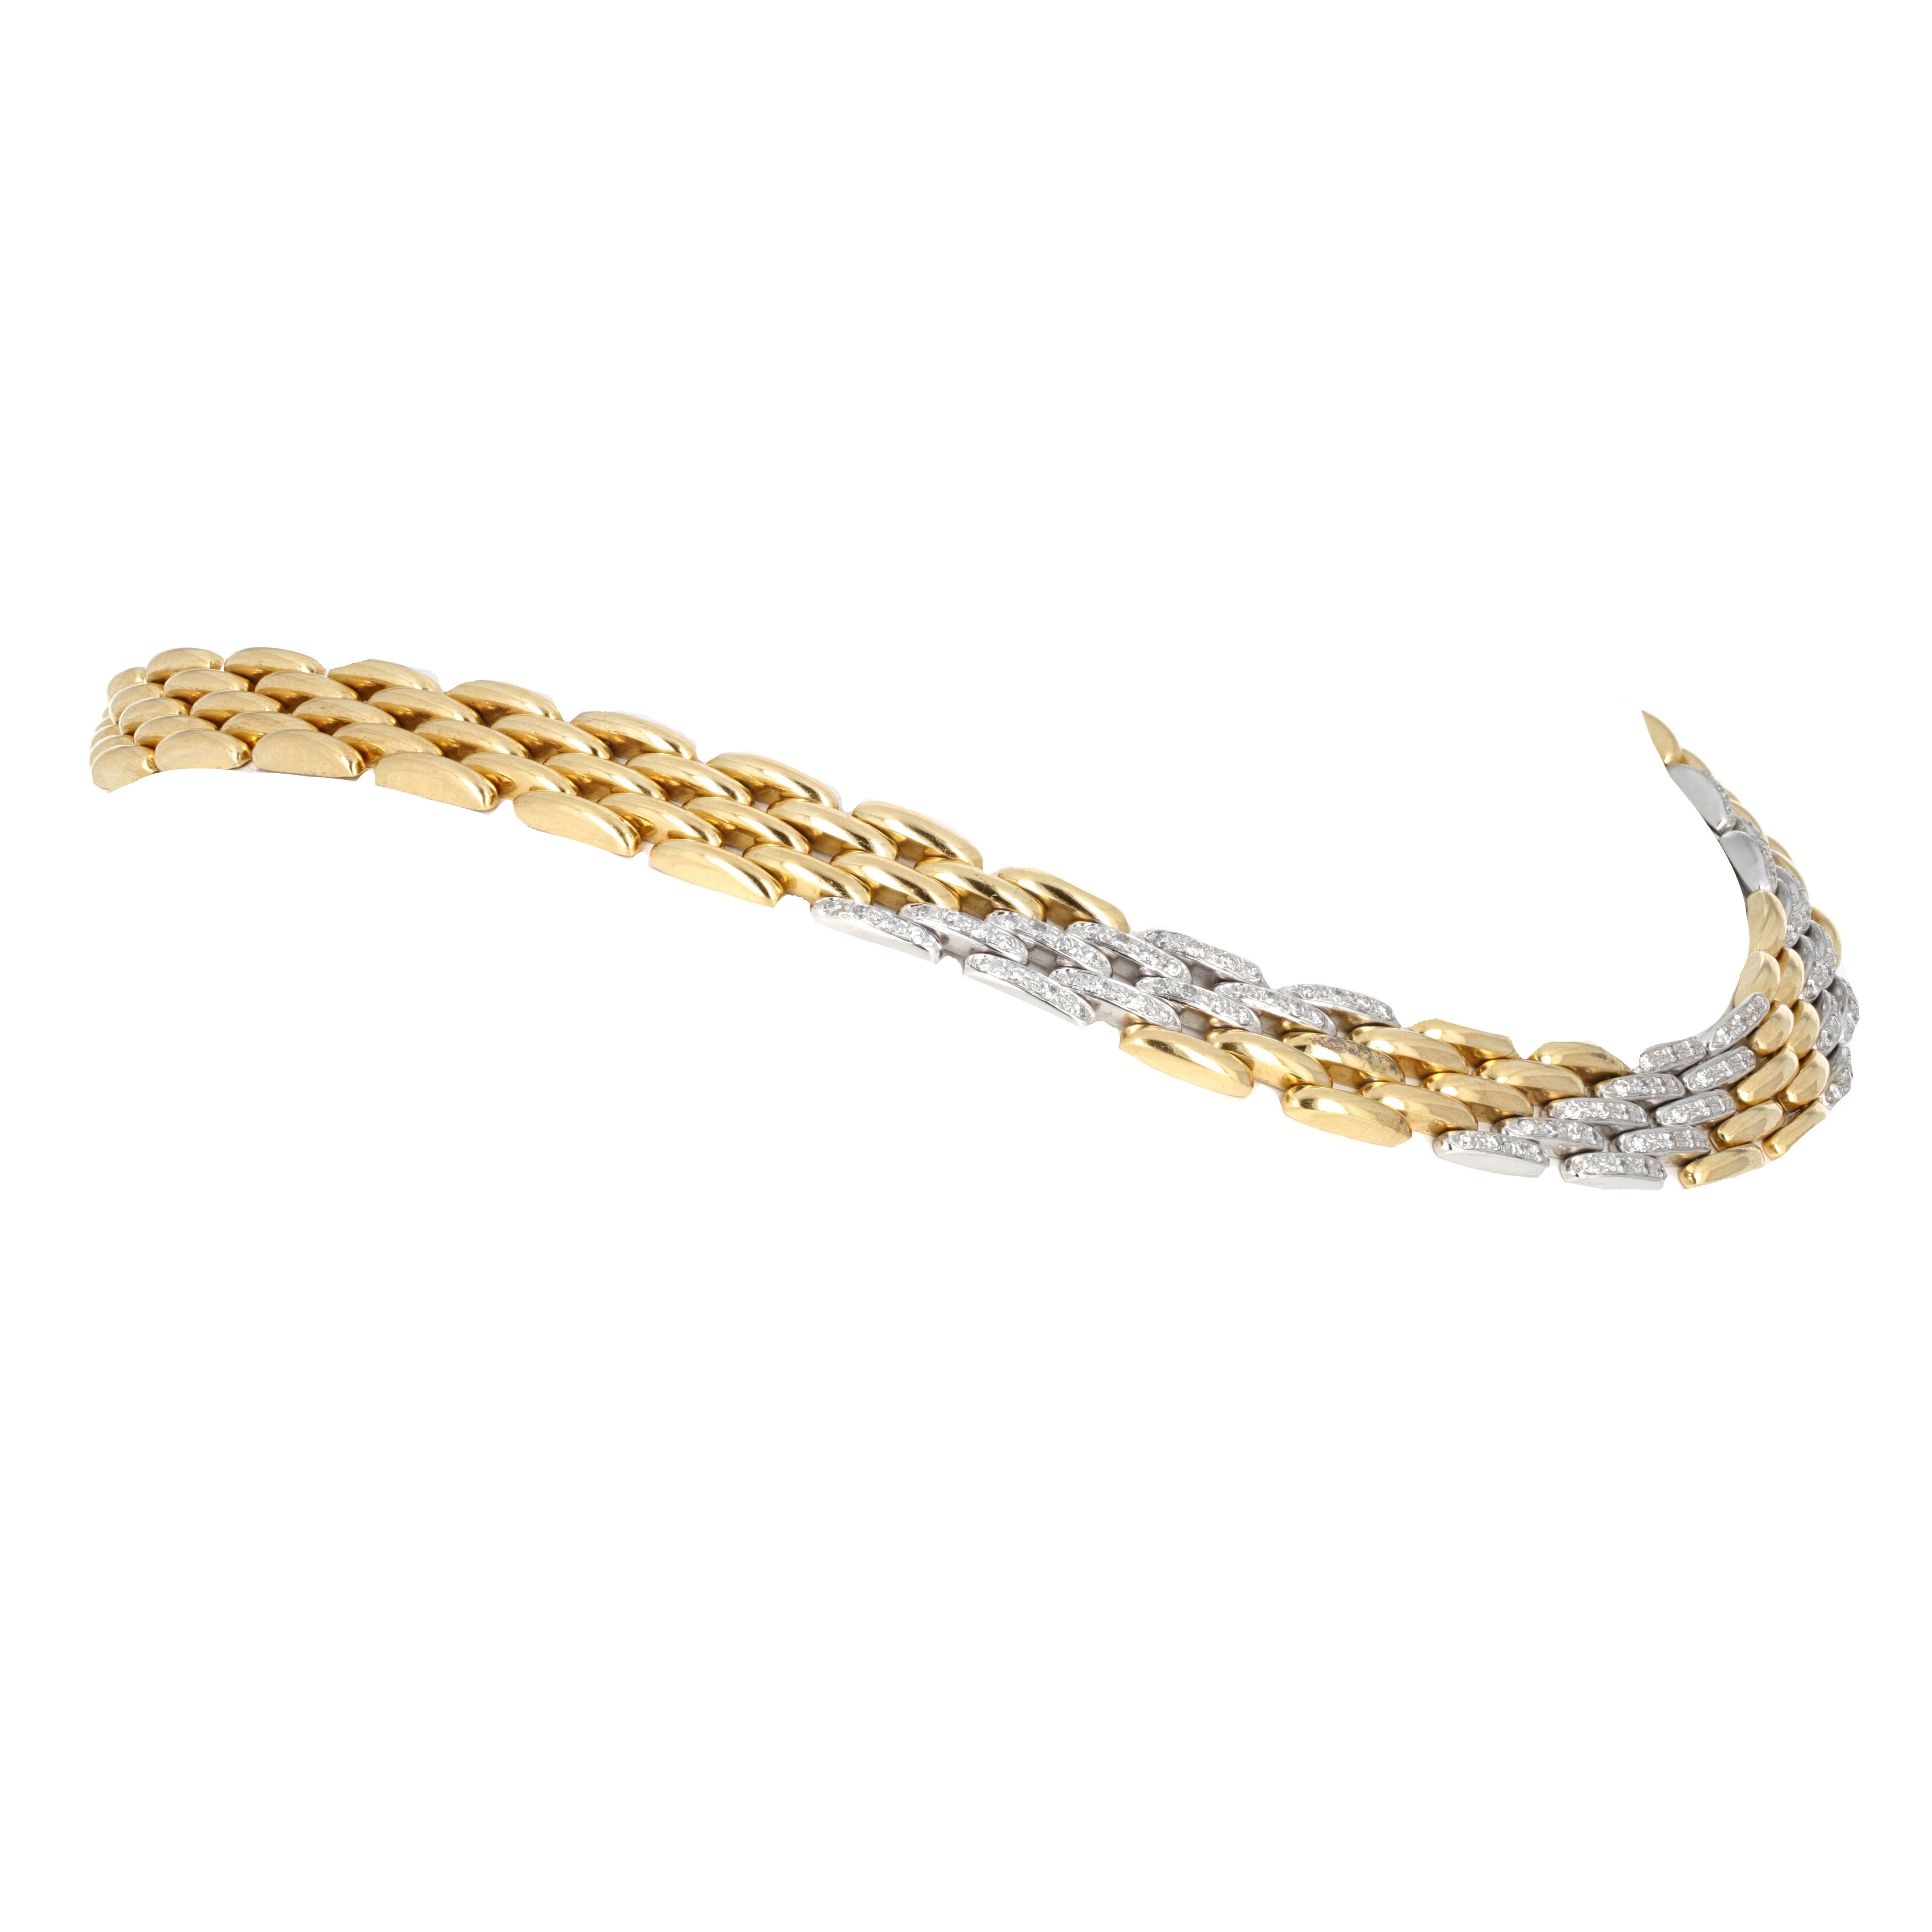 Estate retro, 18 karat yellow gold and diamond link necklace. There are 120 round brilliant cut white diamonds weighing a total of 1.20 carats.
The necklace is in excellent condition
